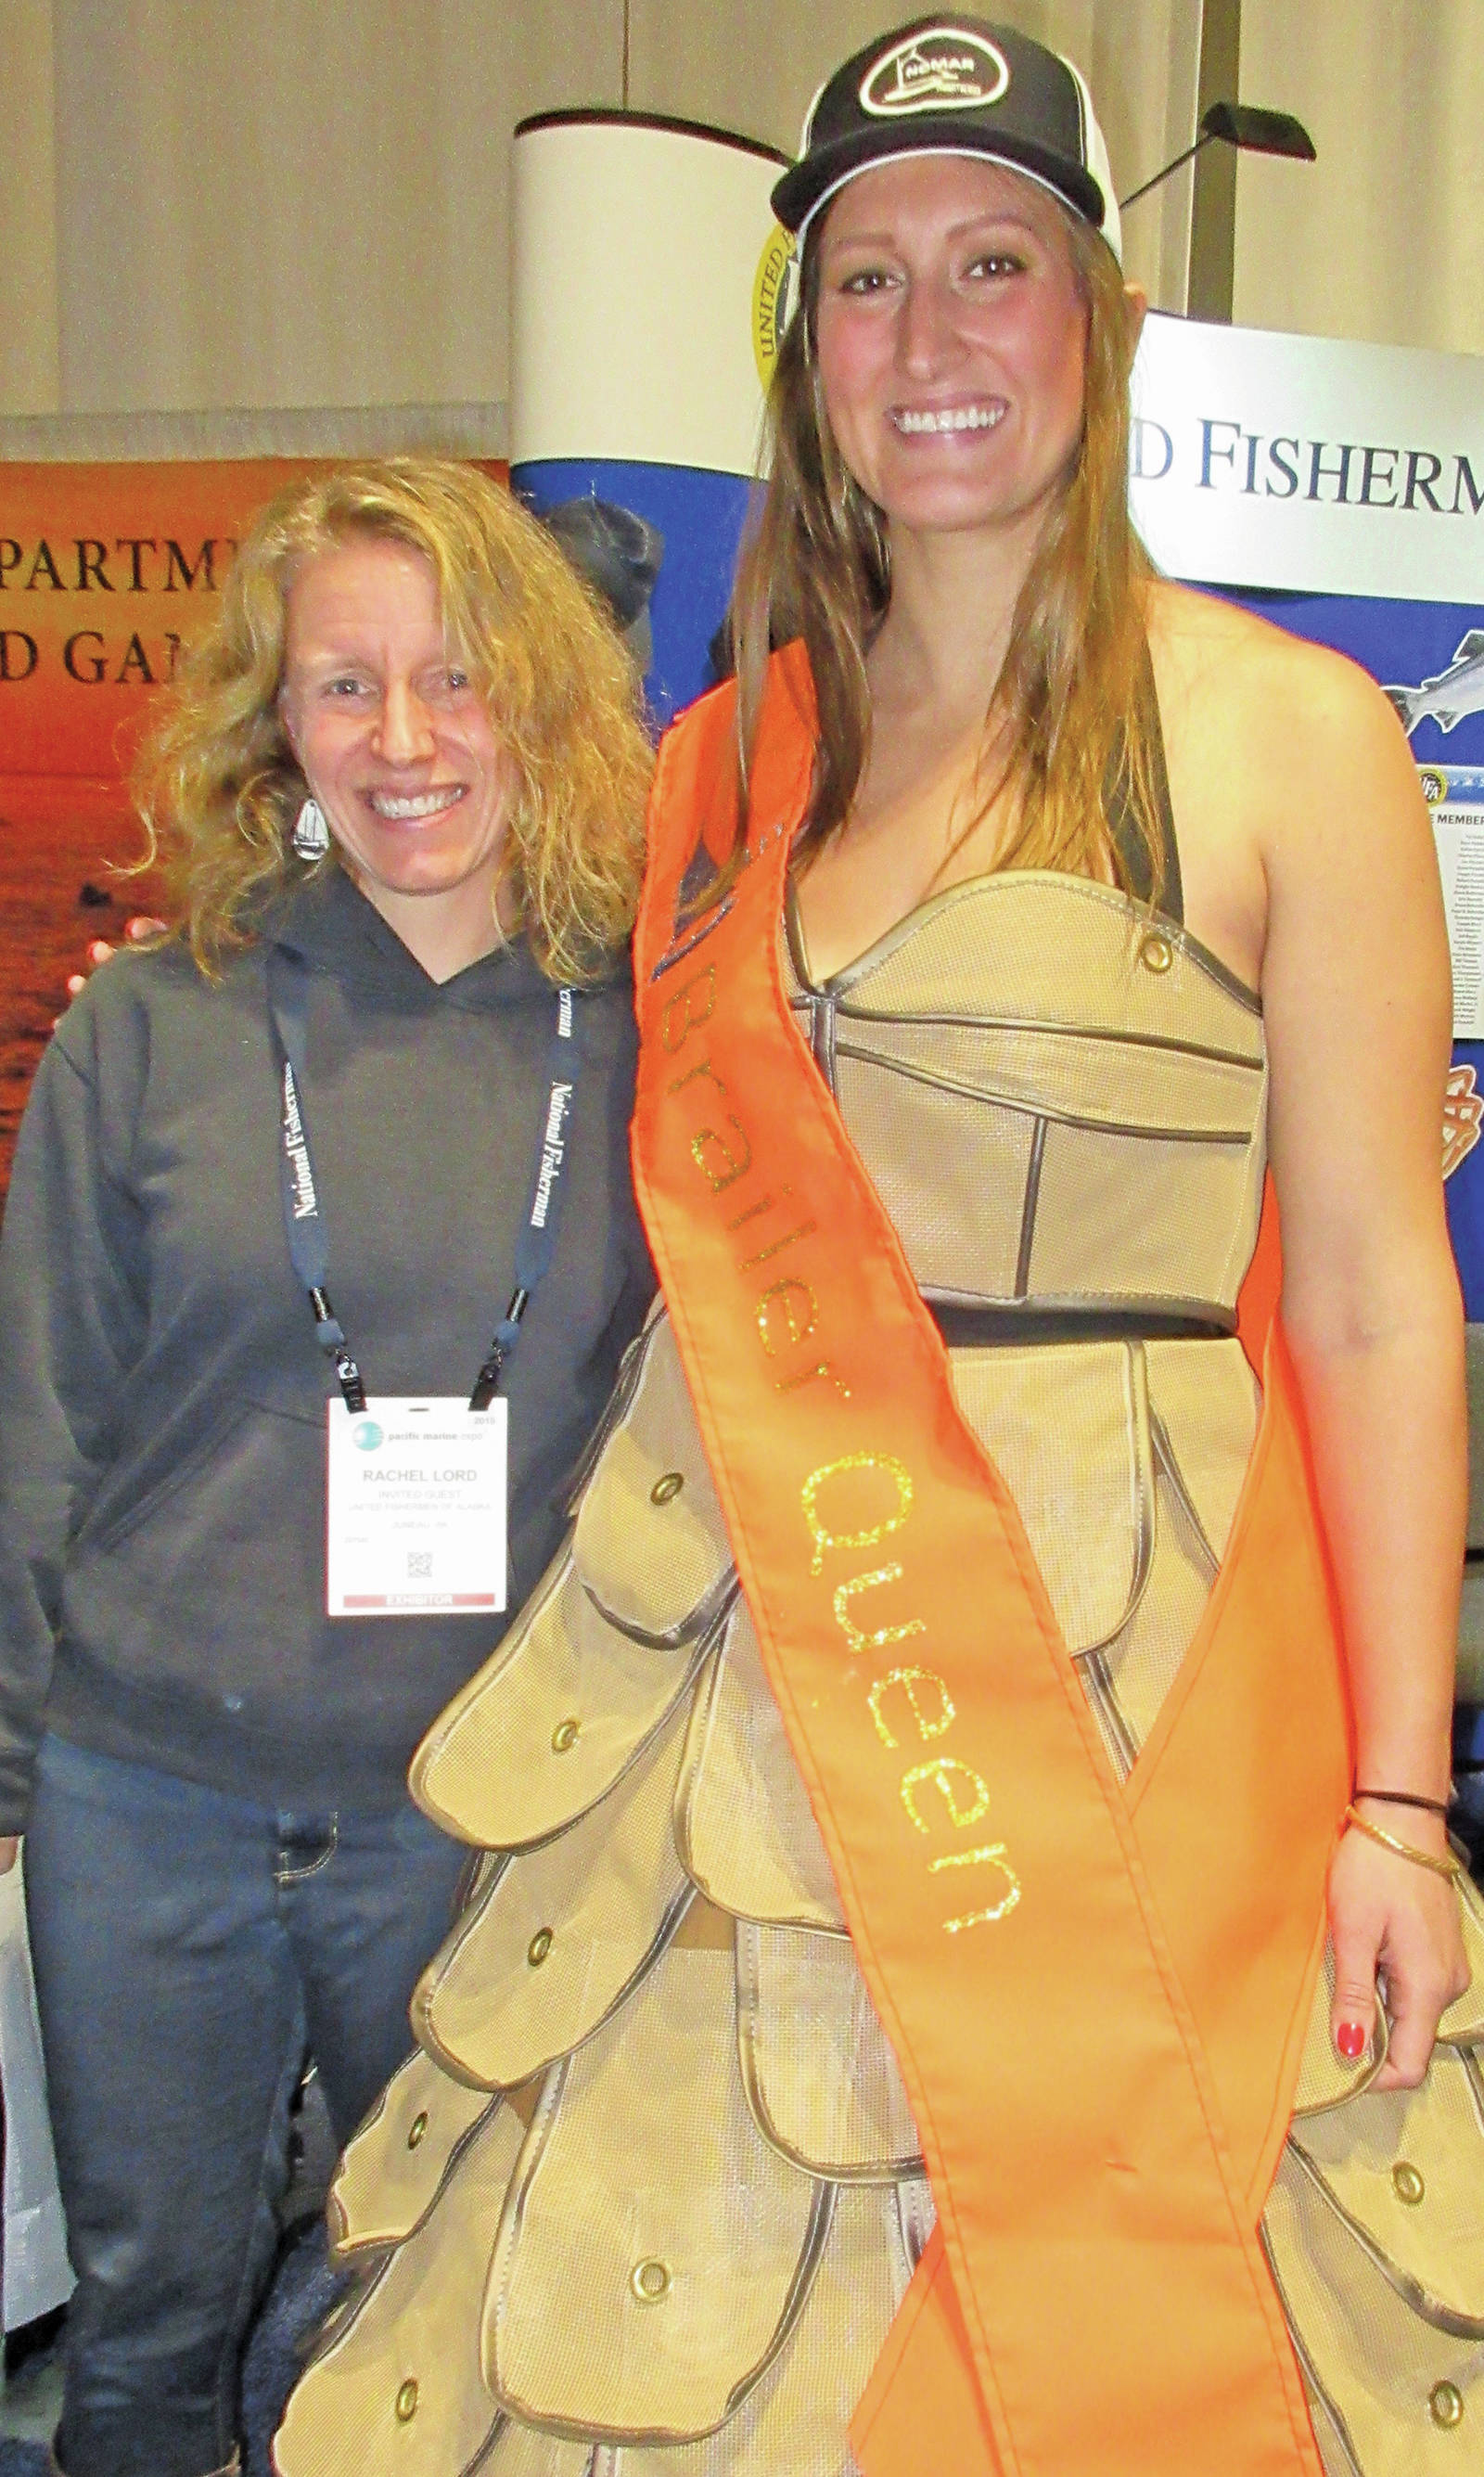 Homer City Council member Rachel Lord poses for a photo with fisherman Reba Temple, who walked through Pacific Marine Expo in a dress featuring NOMAR brailer bags and sewn by NOMAR employee Cassie Brooks, on Nov. 23, 2019, in Seattle. Lord attended the event as an invited guest of United Fishermen of Alaska. (Photo by McKibben Jackinsky)